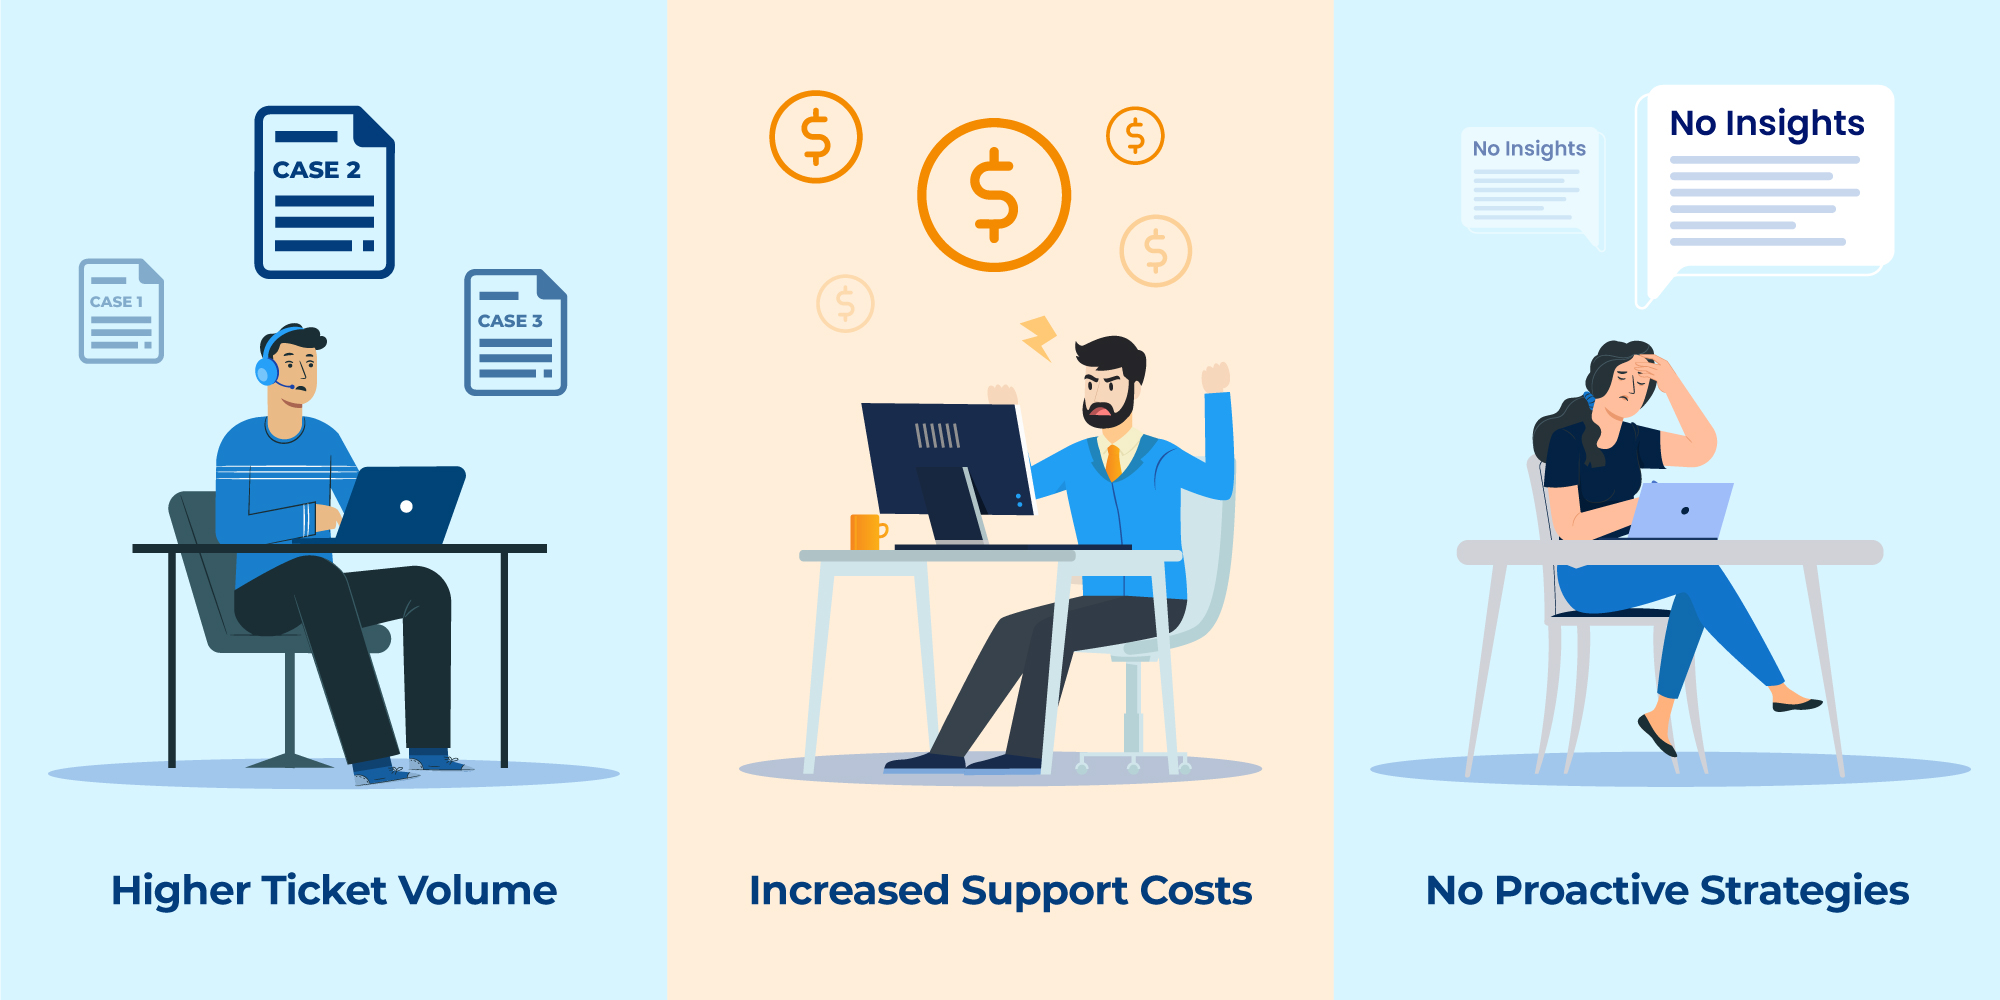 Poor customer portal impacts on support organizations